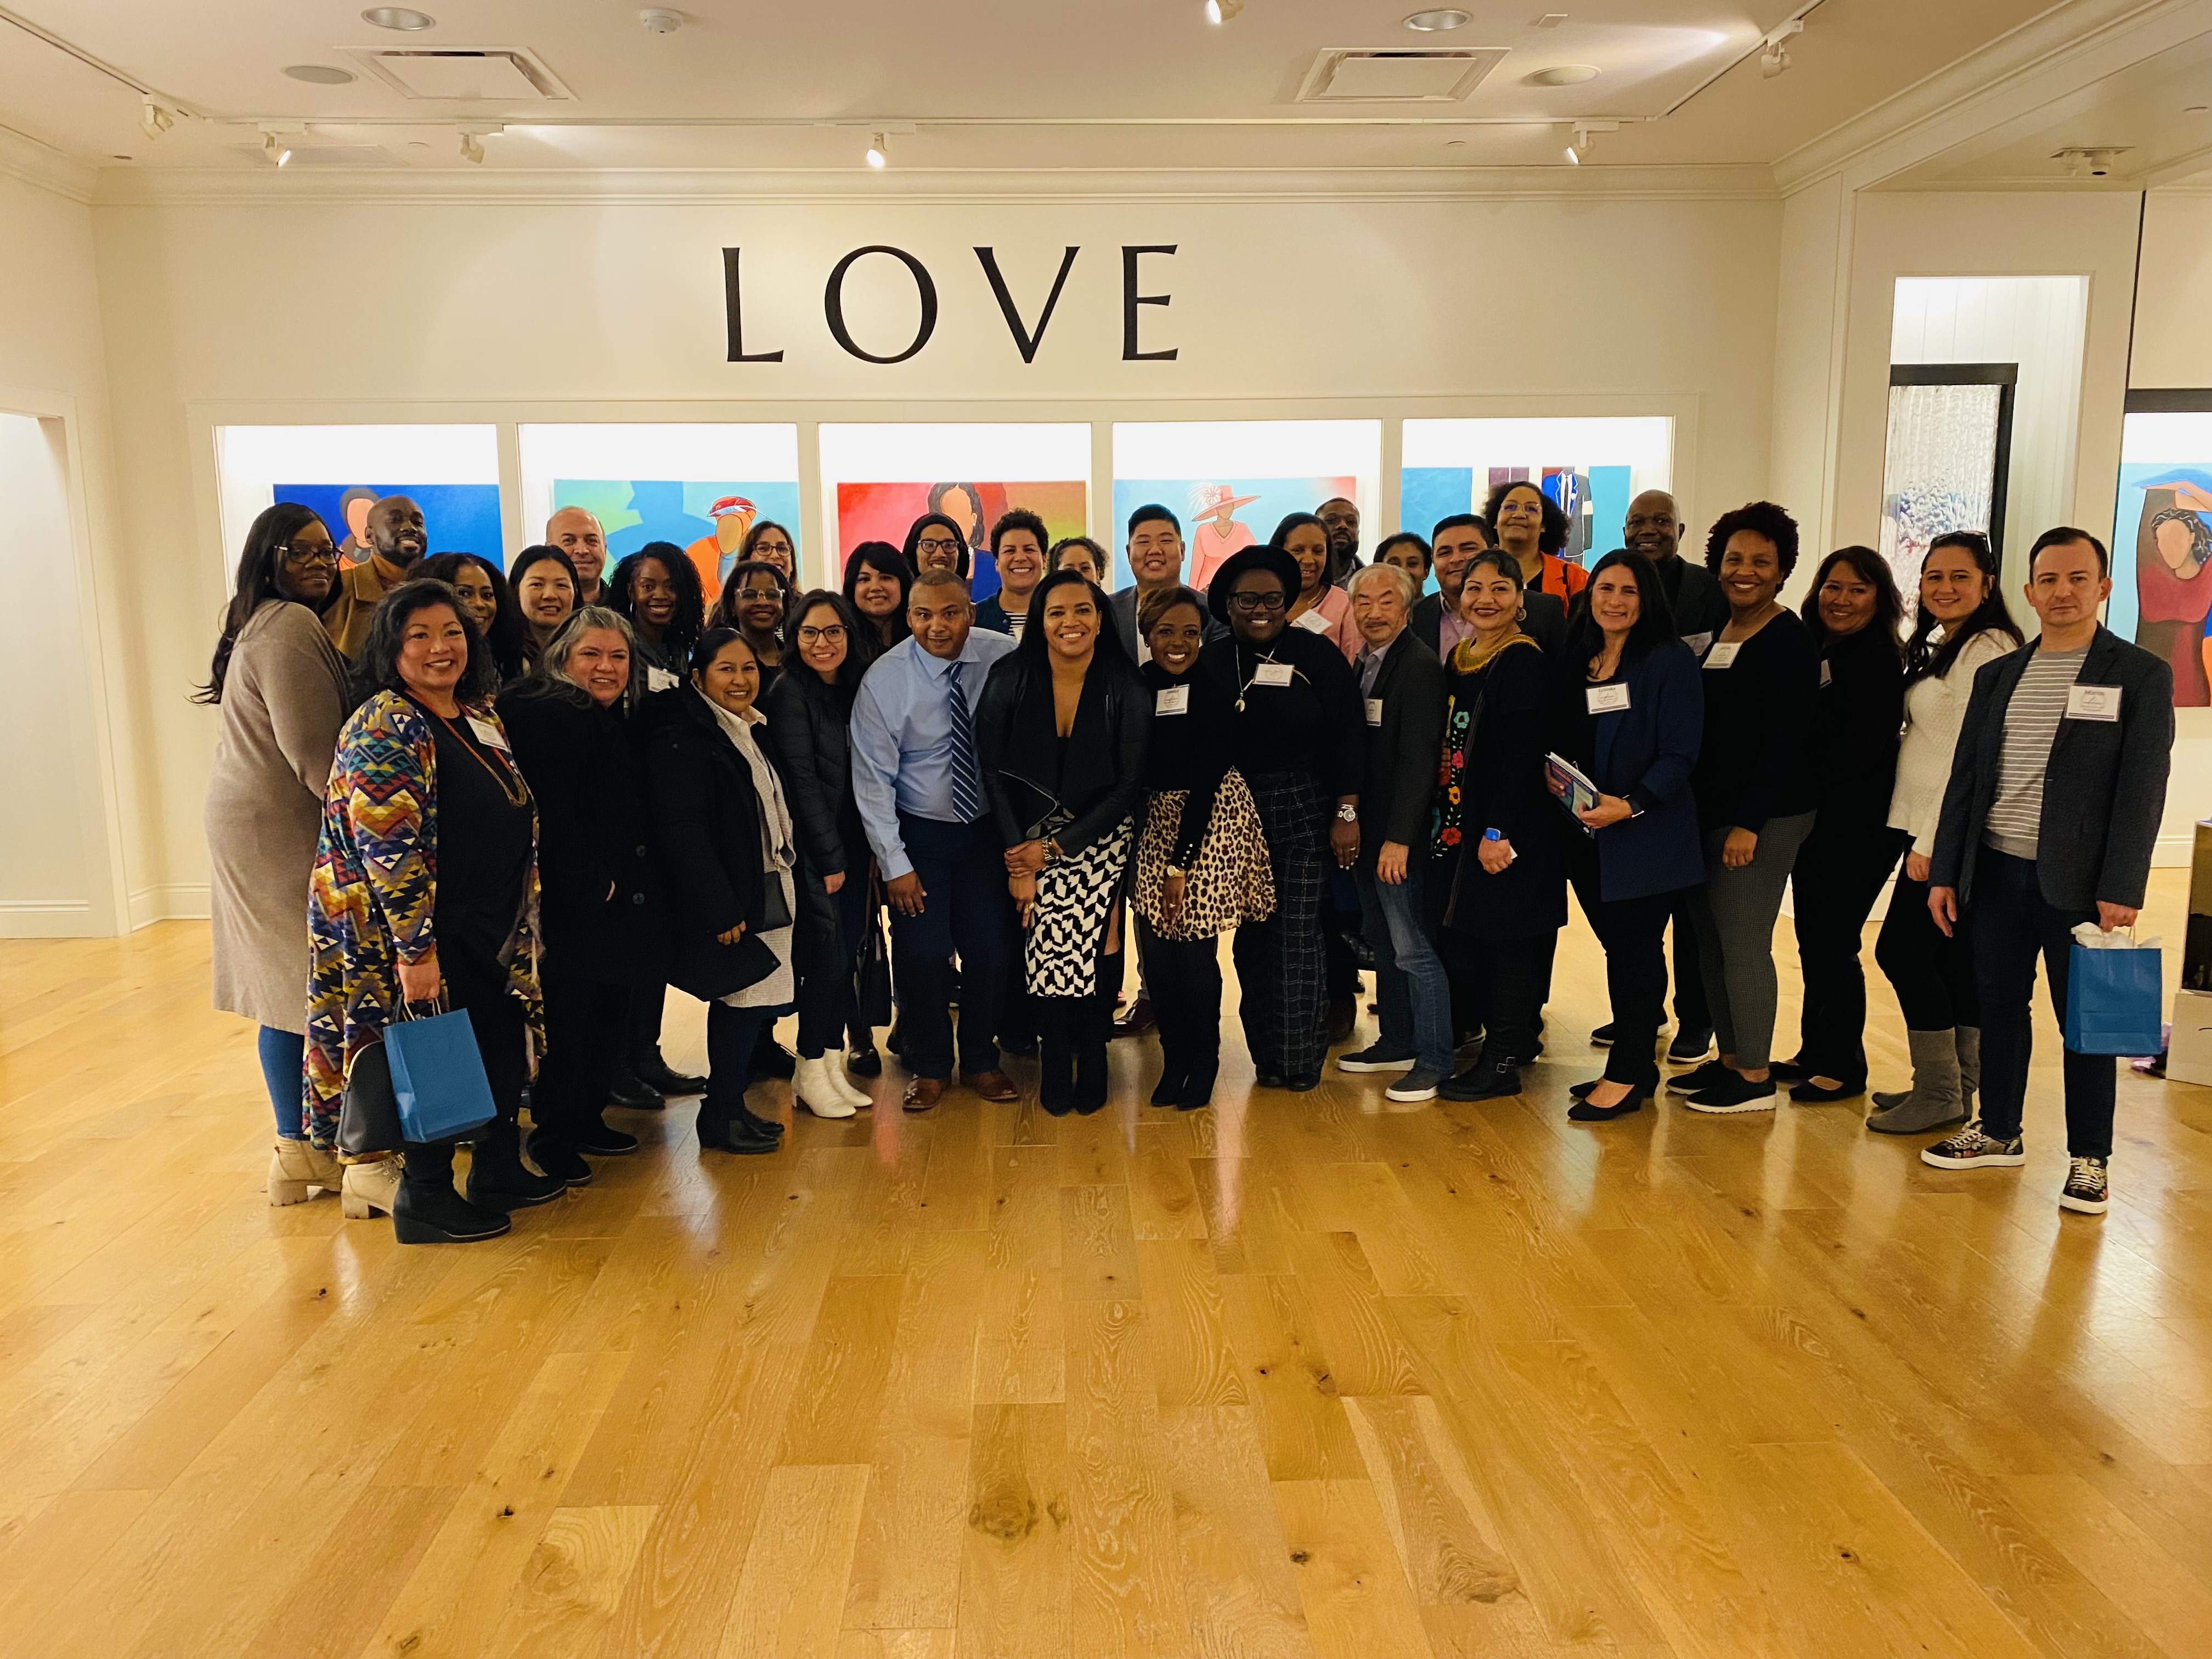 group photo of the participants of the leaders of color event at the WOW gallery in Seattle, WA